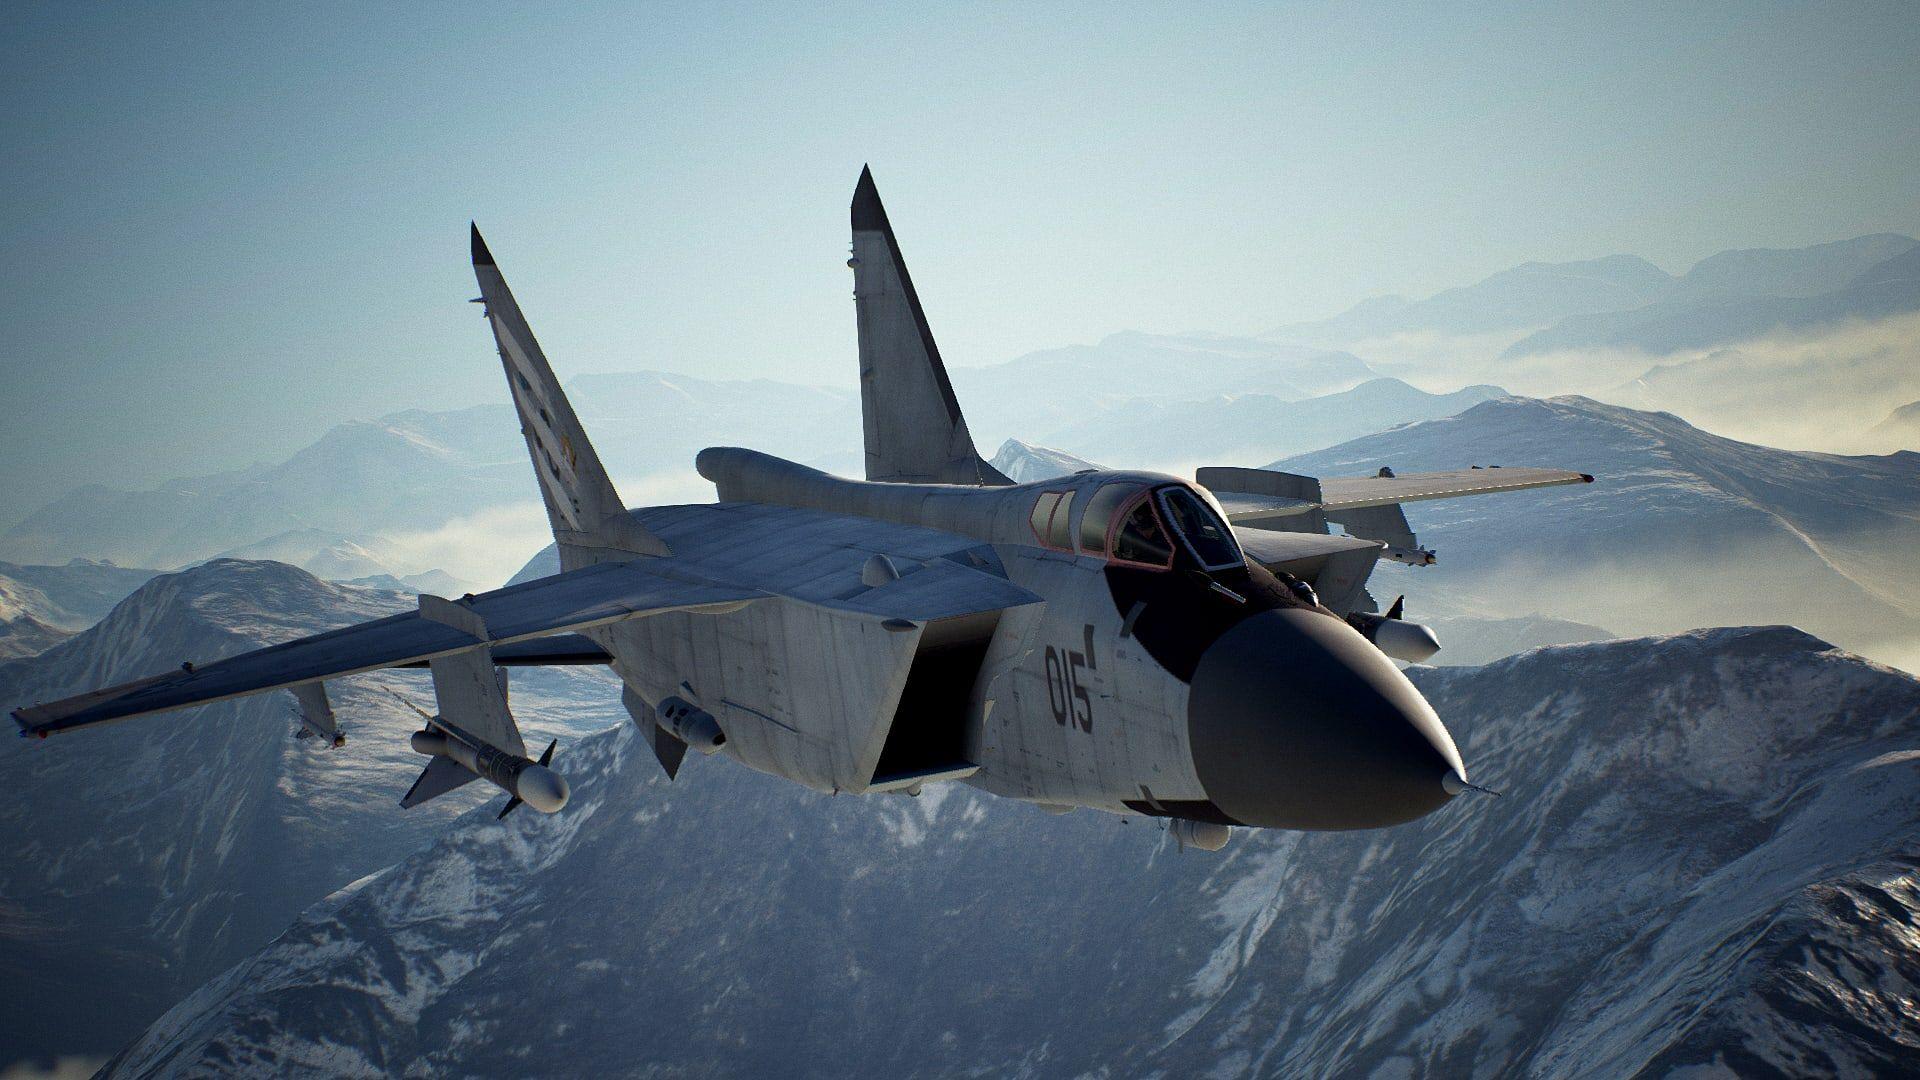 Buy Ace Combat 7: Skies Unknown on PlayStation 4. Free UK Delivery